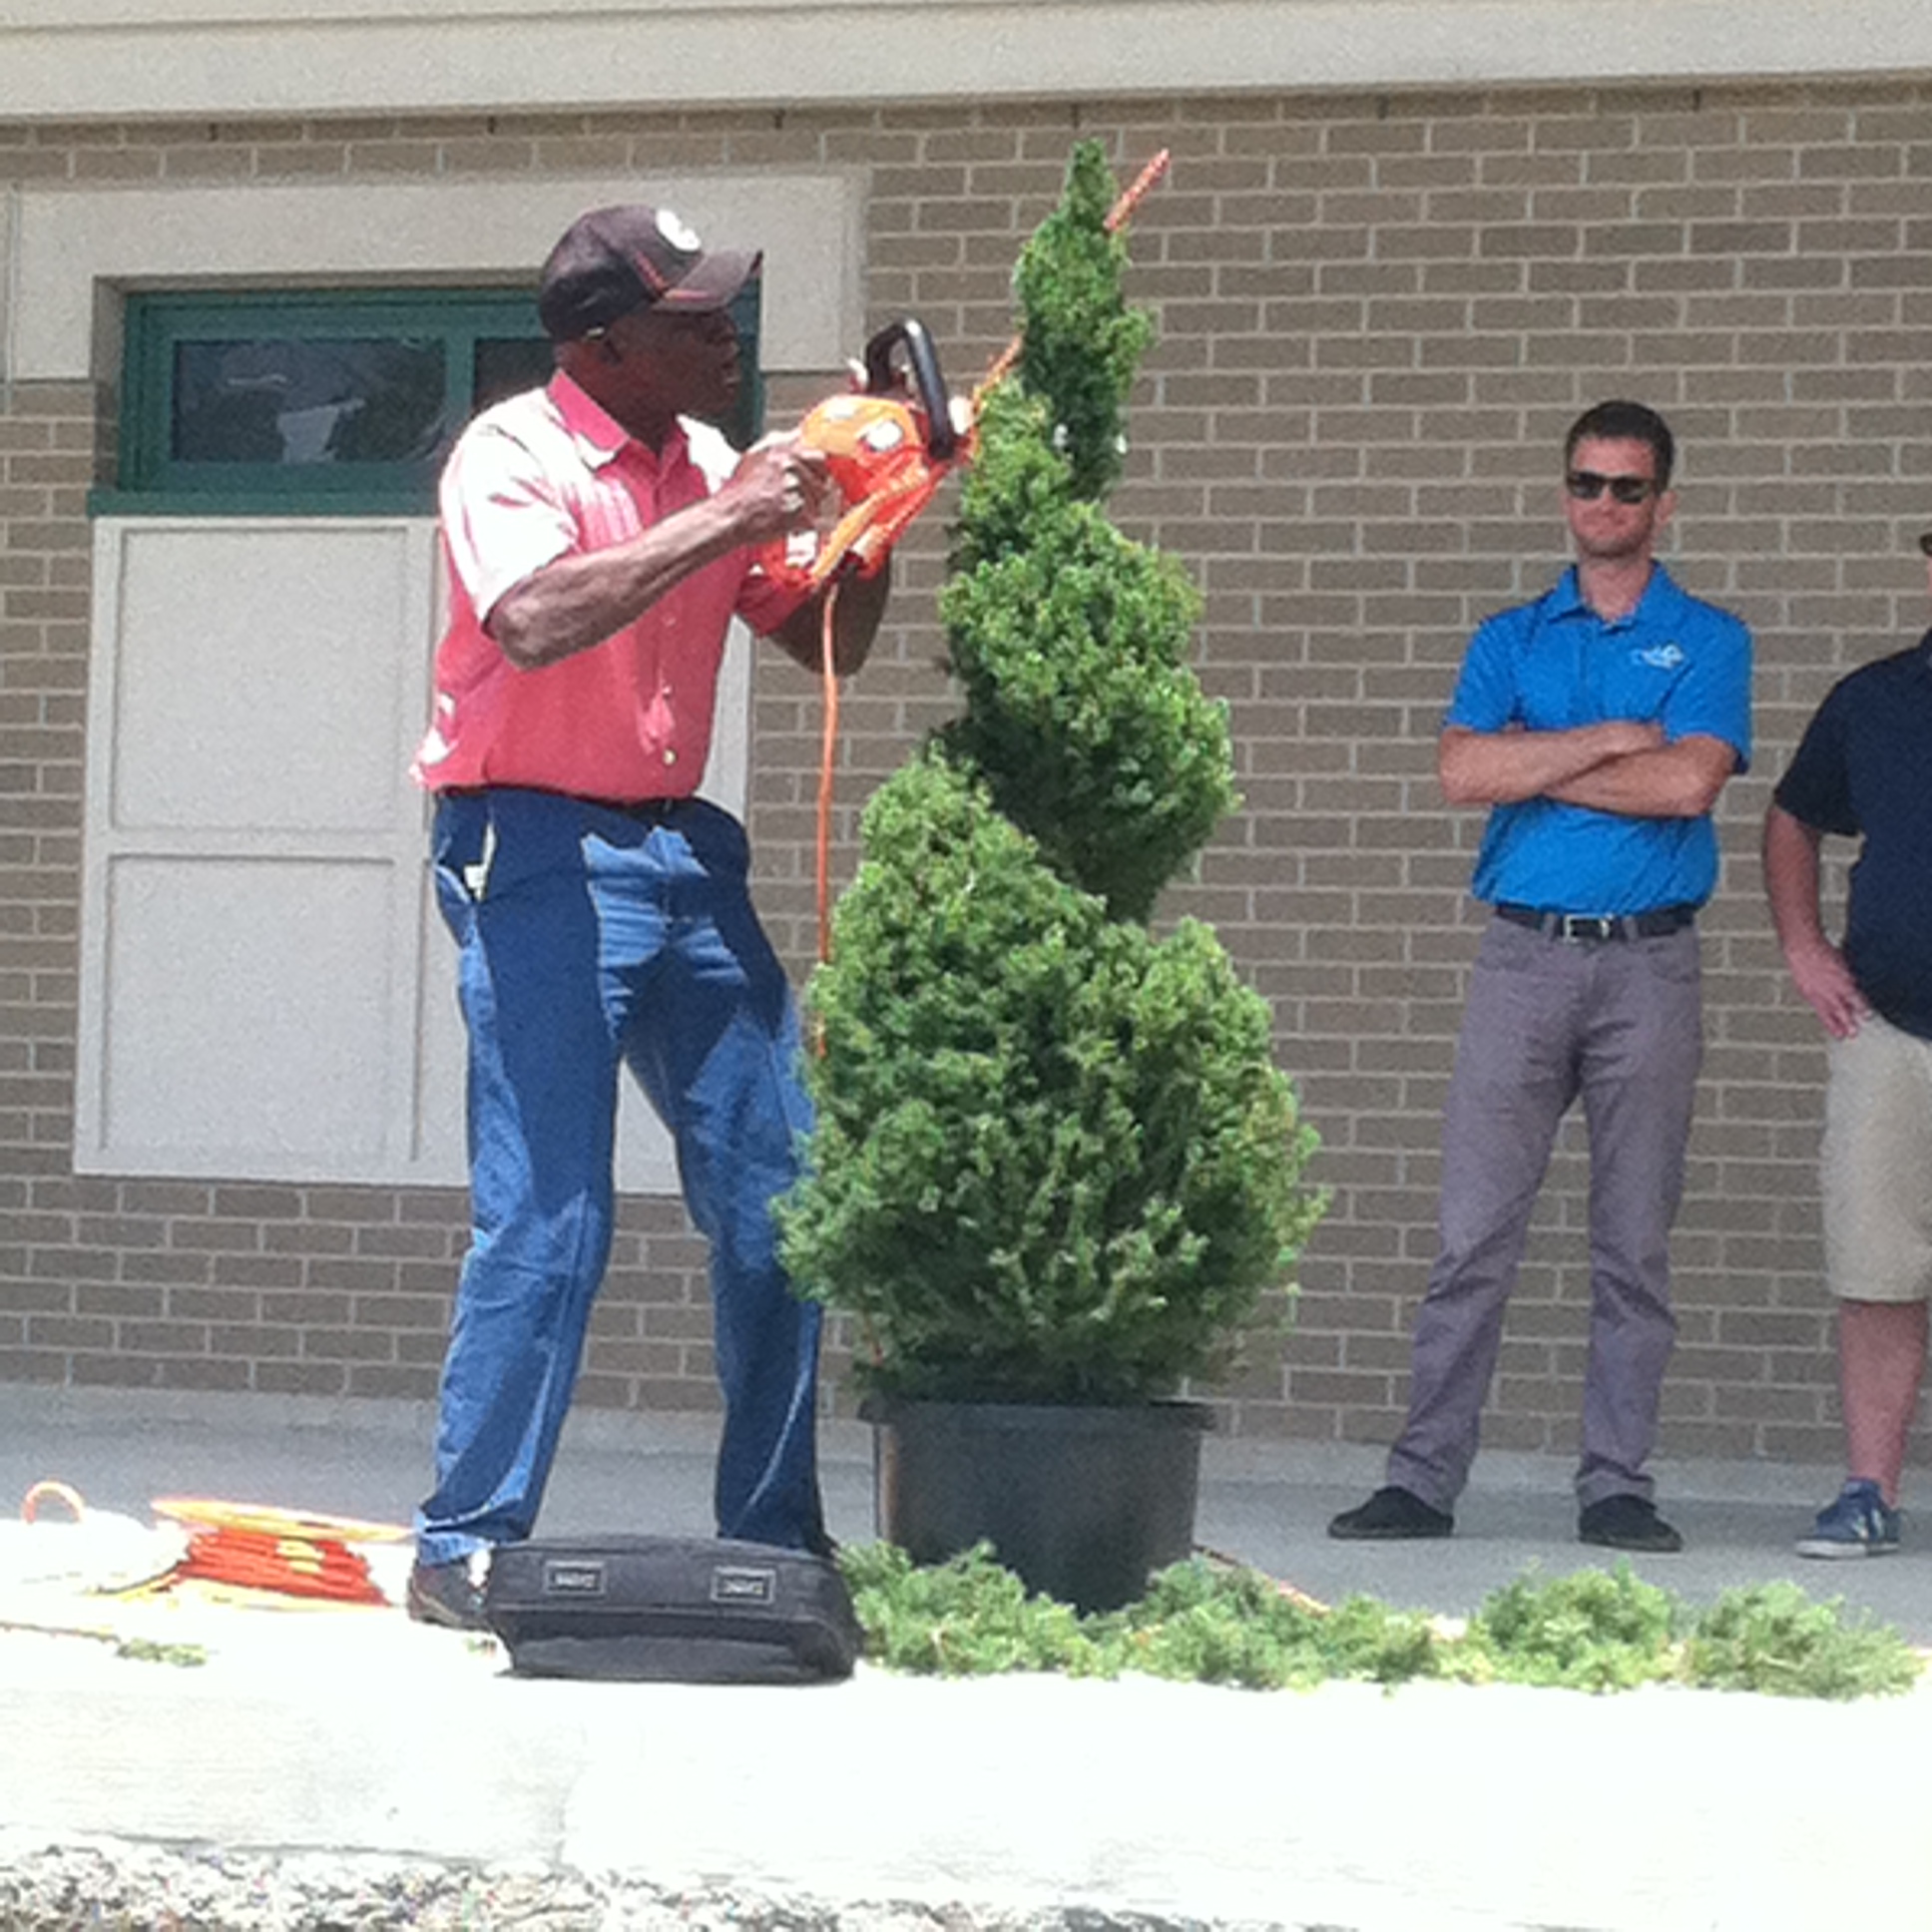 Topiary expert Pearl Fryar demonstrated techniques at a demonstration in Fishers during Gardens and all Things Green celebration. (Photo by Sarah Stoesz)